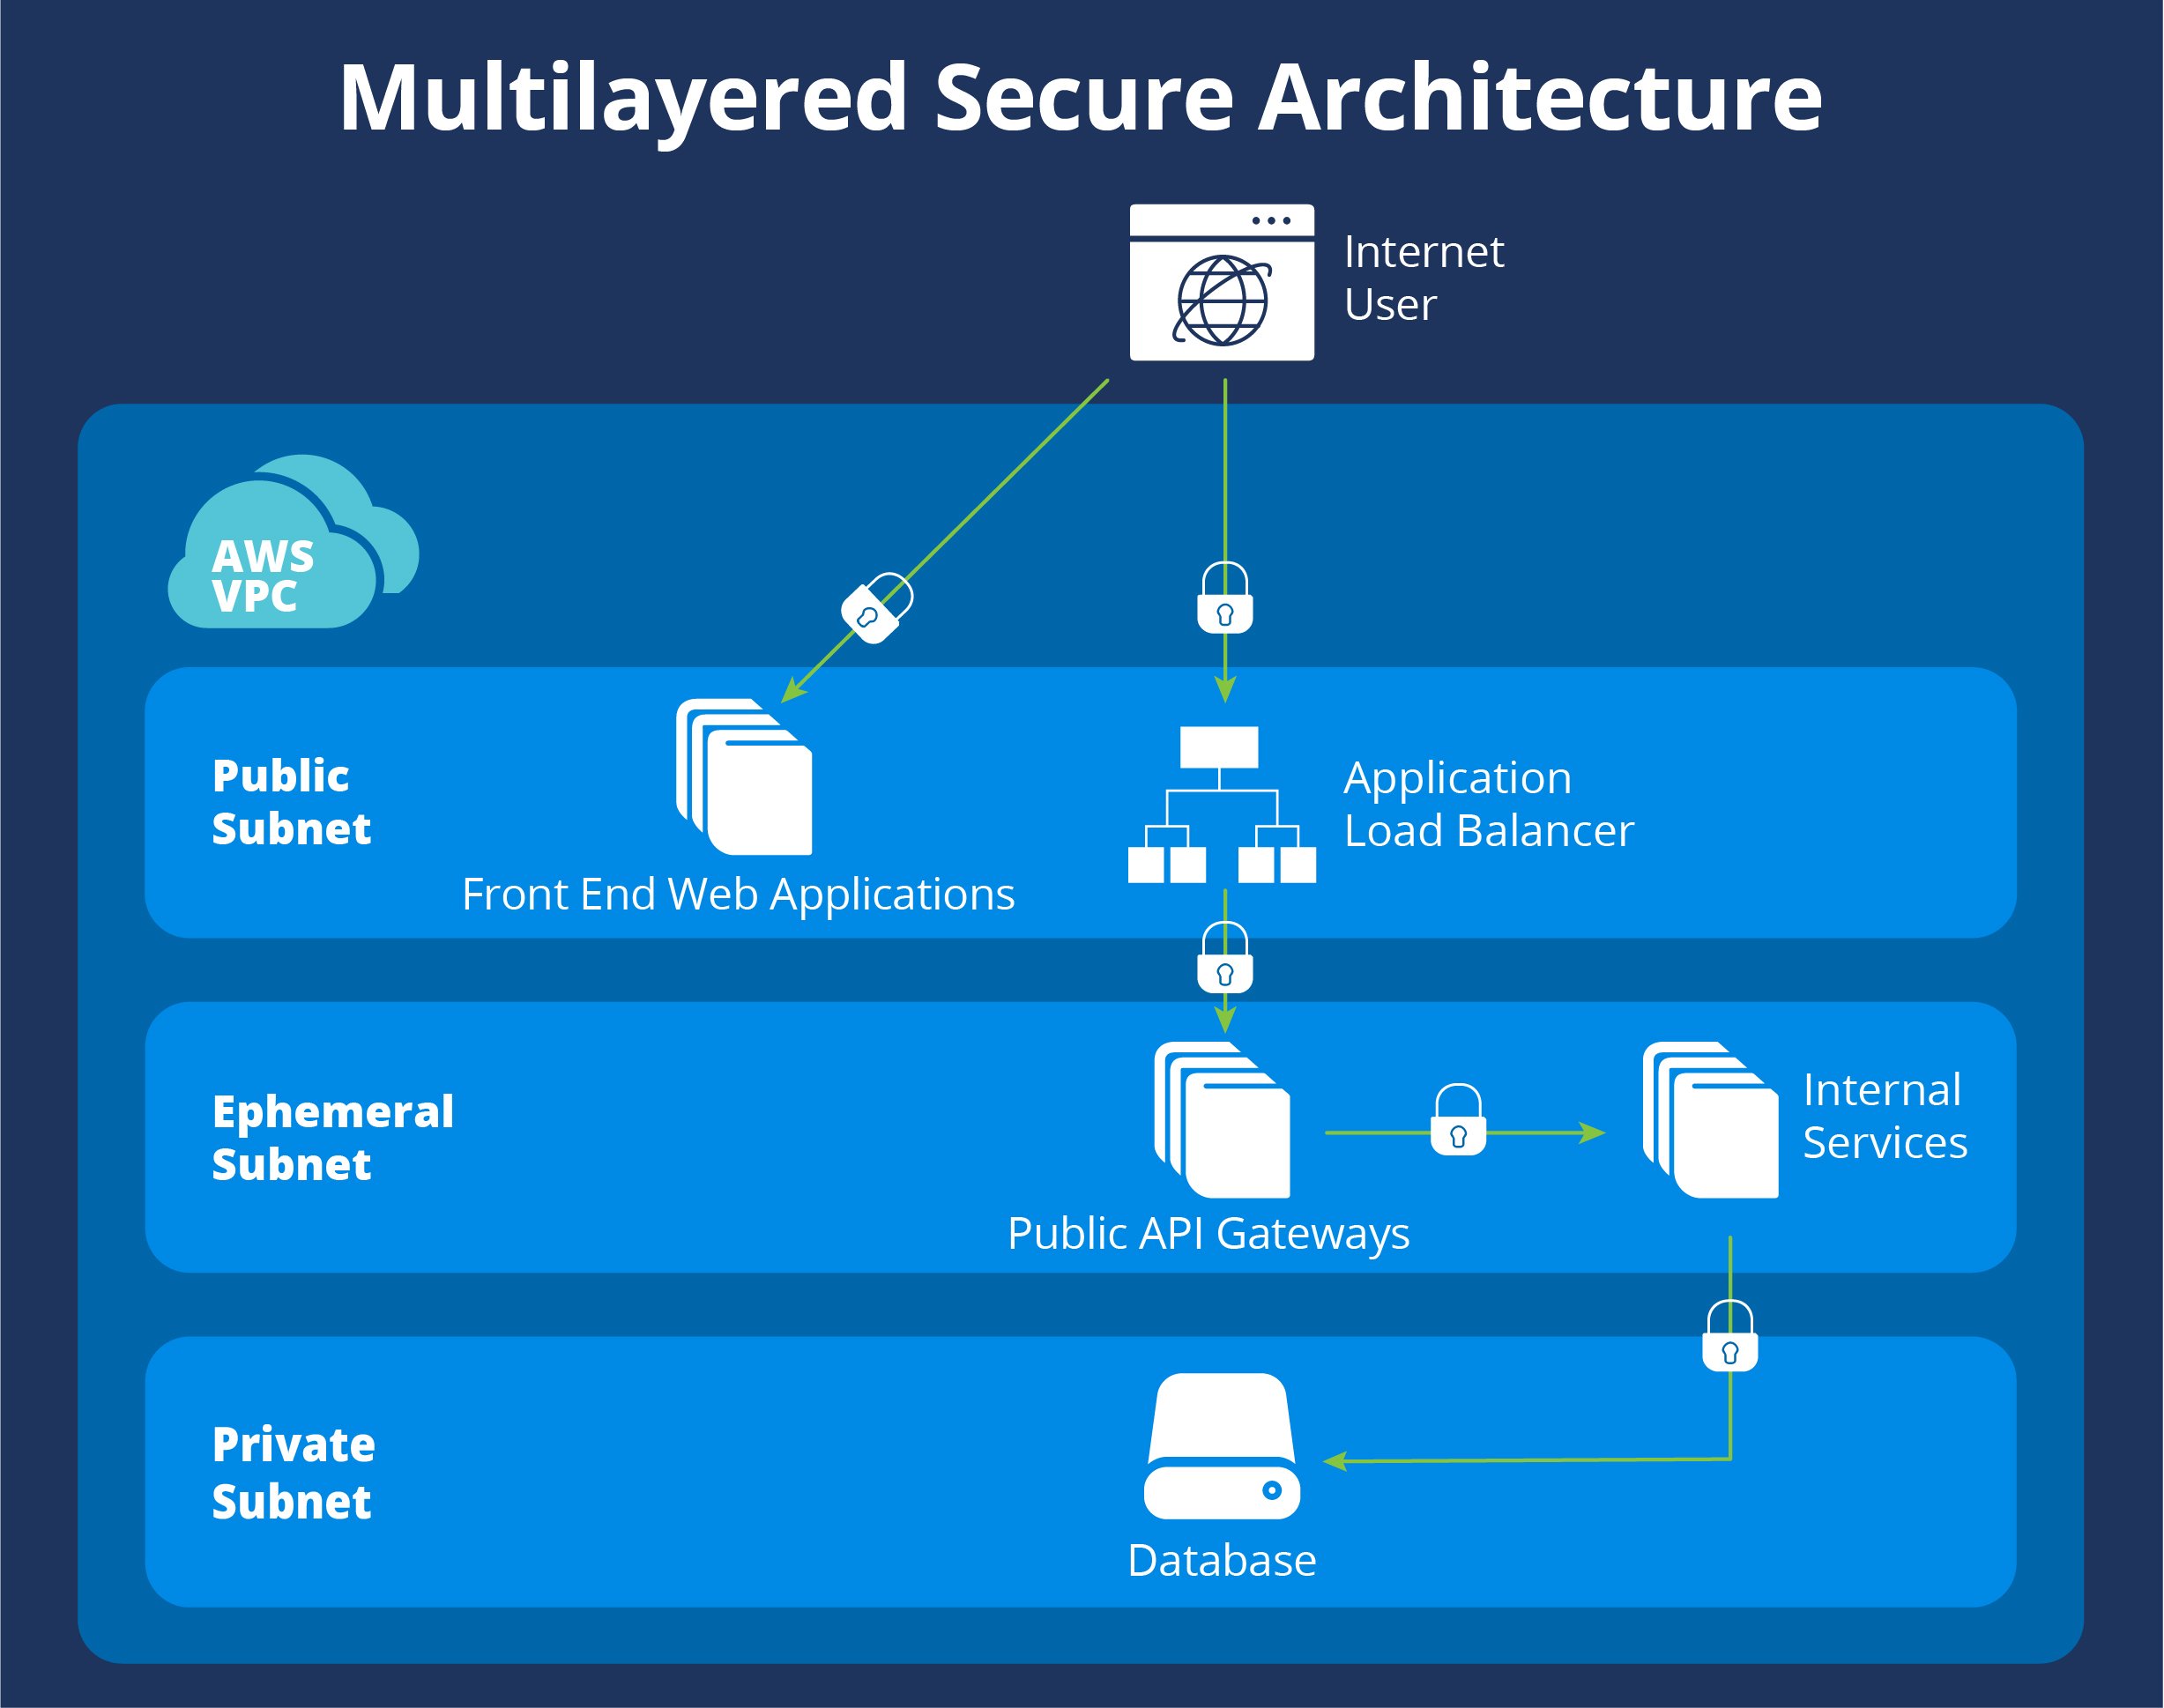 Globality Multilayered Secure Architecture